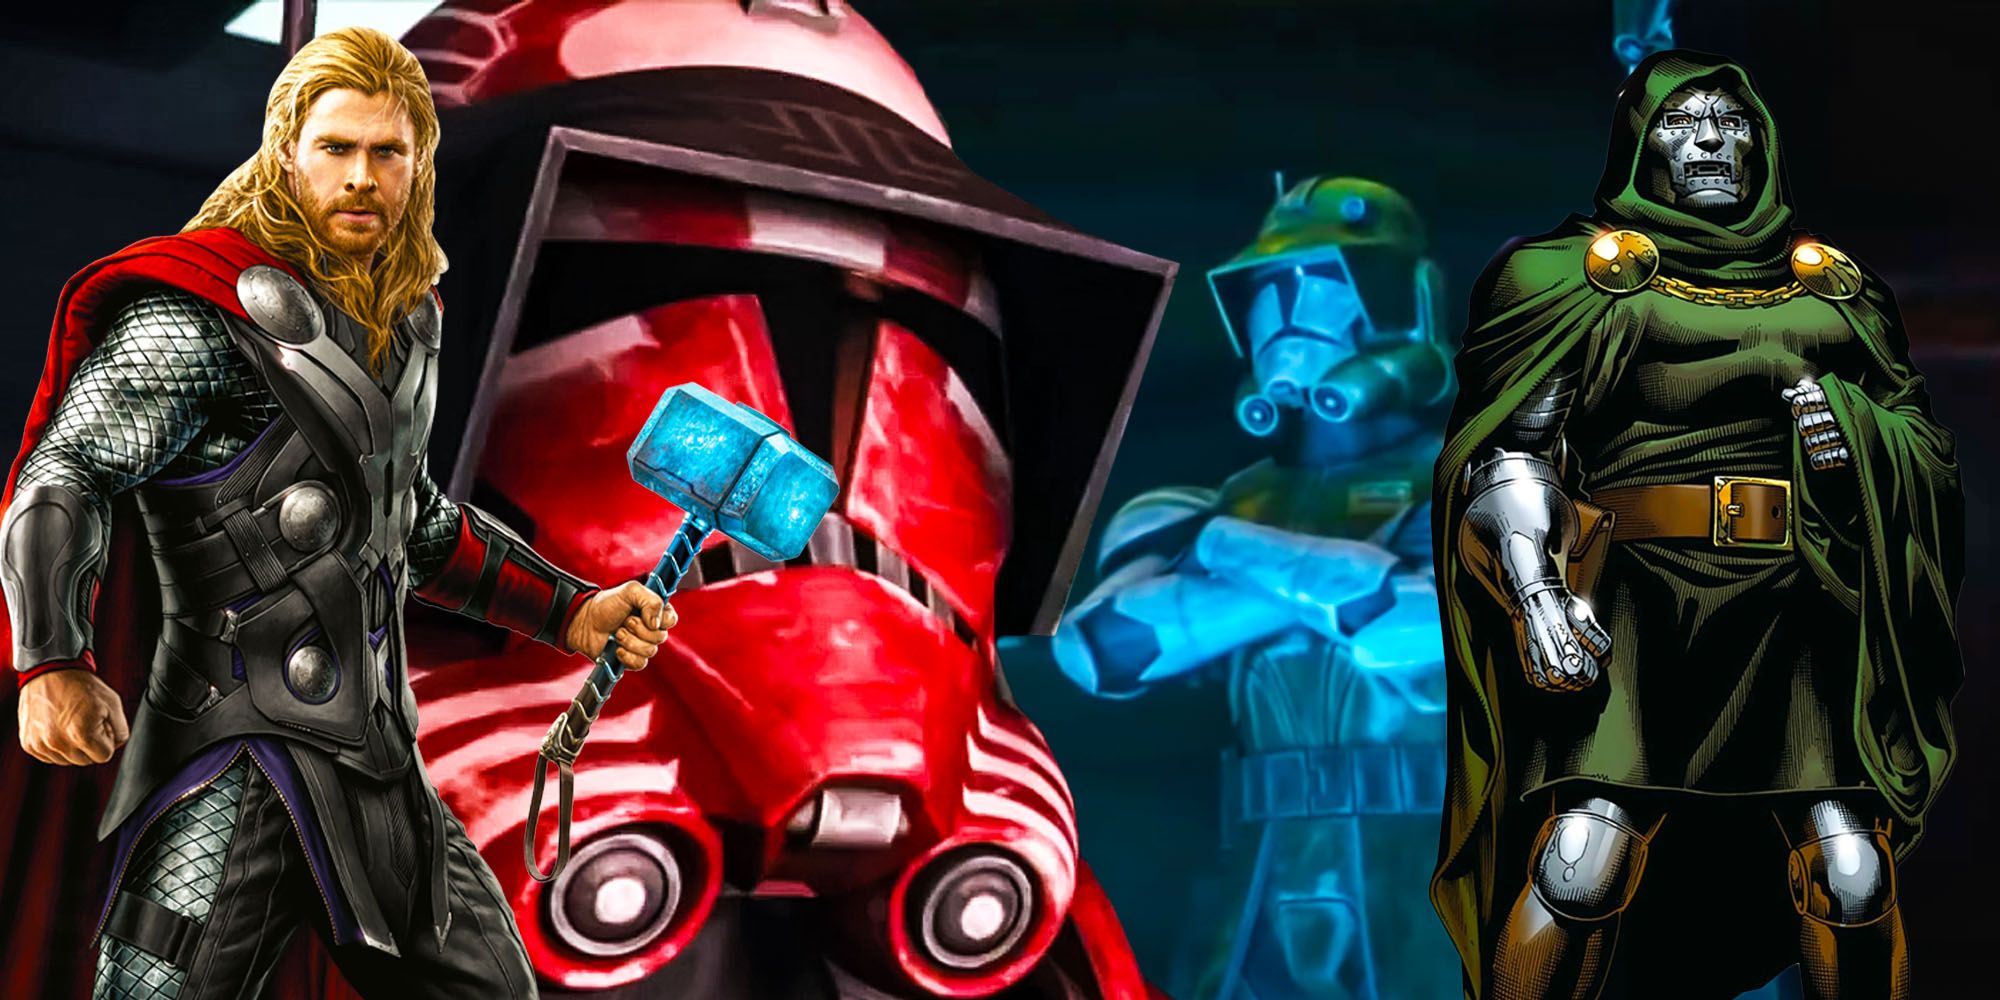 Star Wars The Clone Wars Characters Based On Thor & Dr Doom Explained